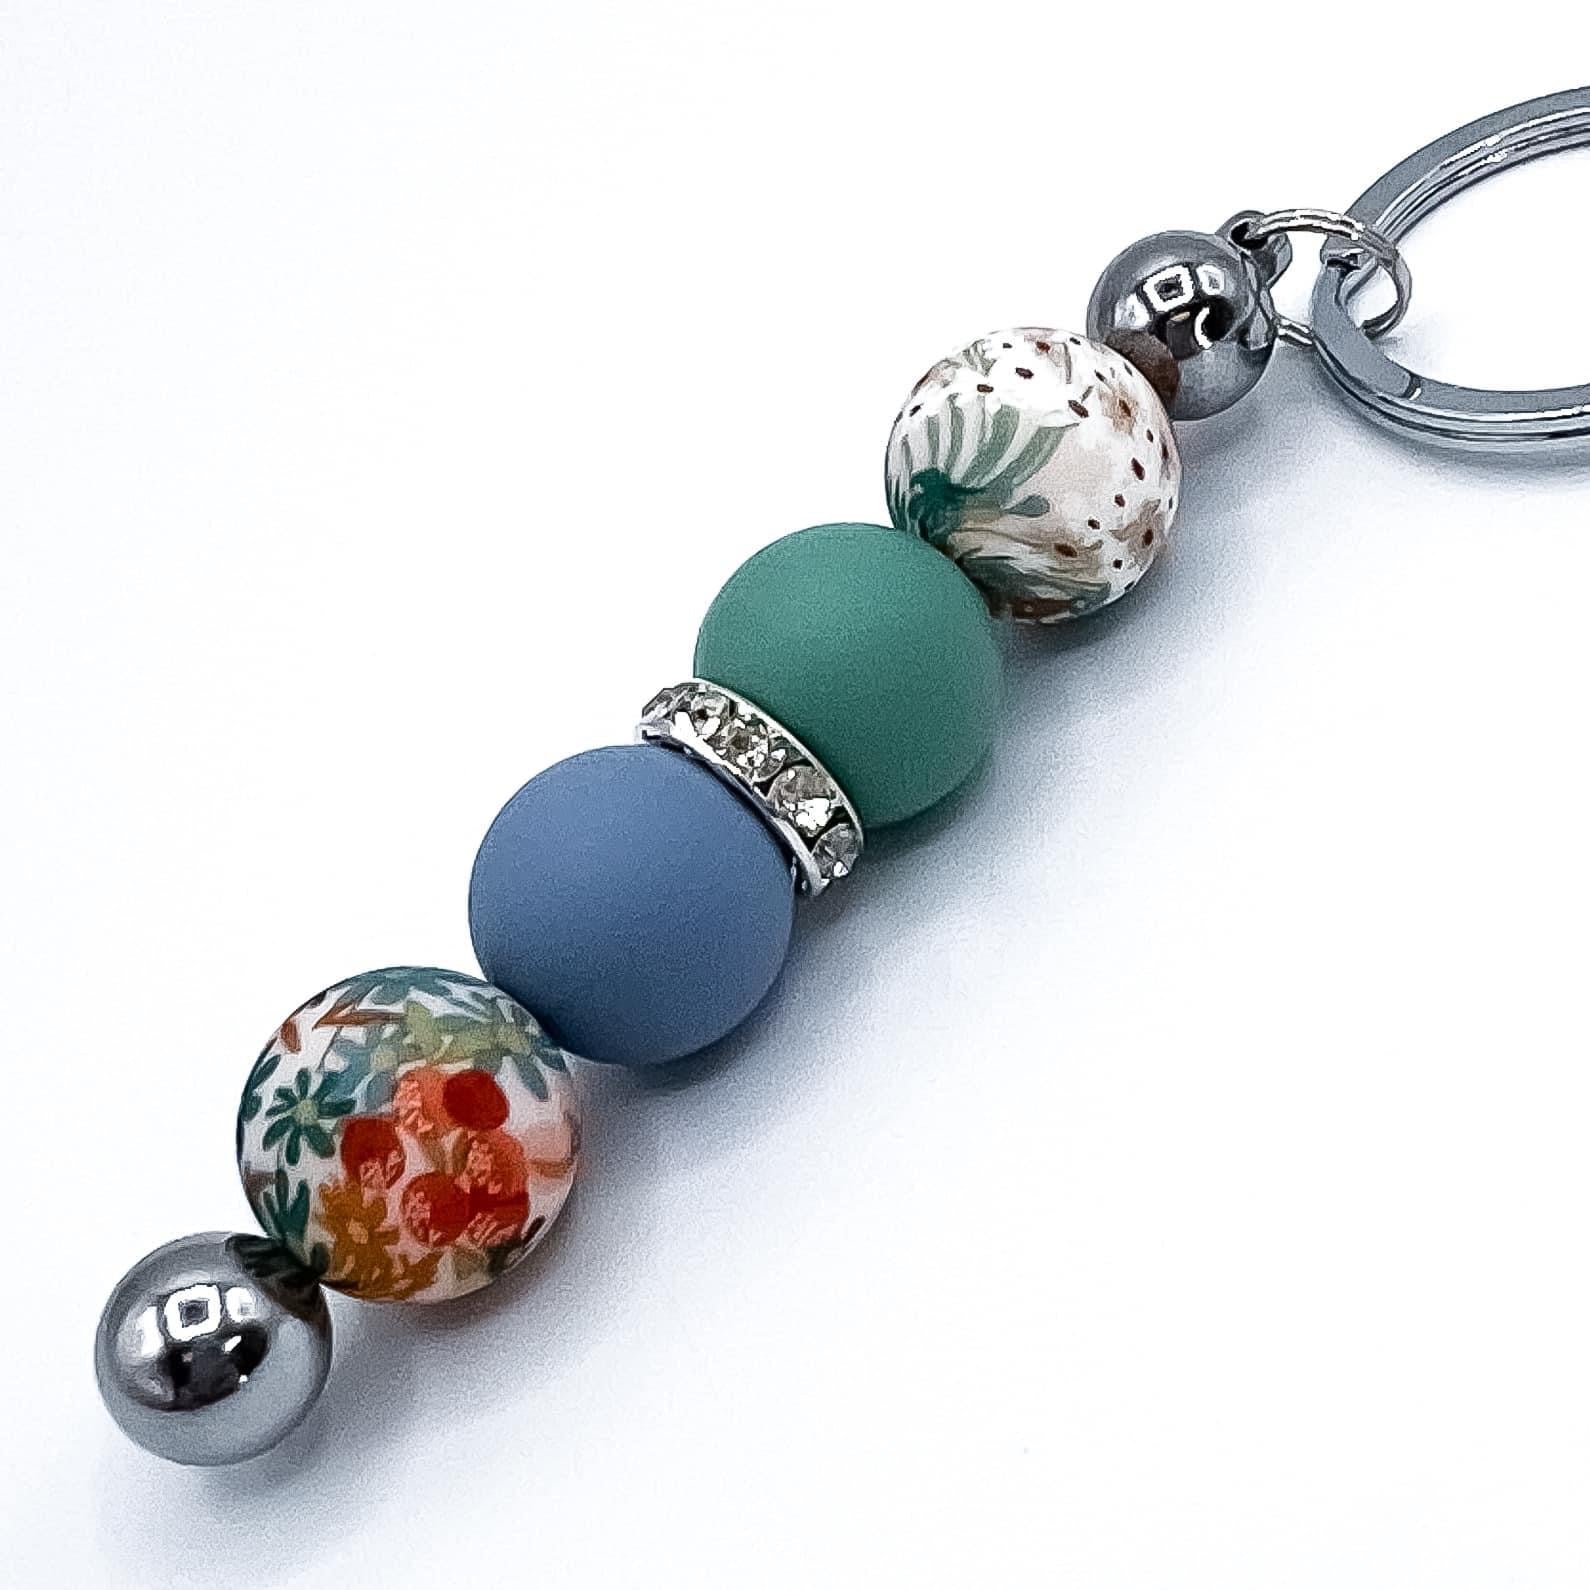 Beadable Keychains with Bar